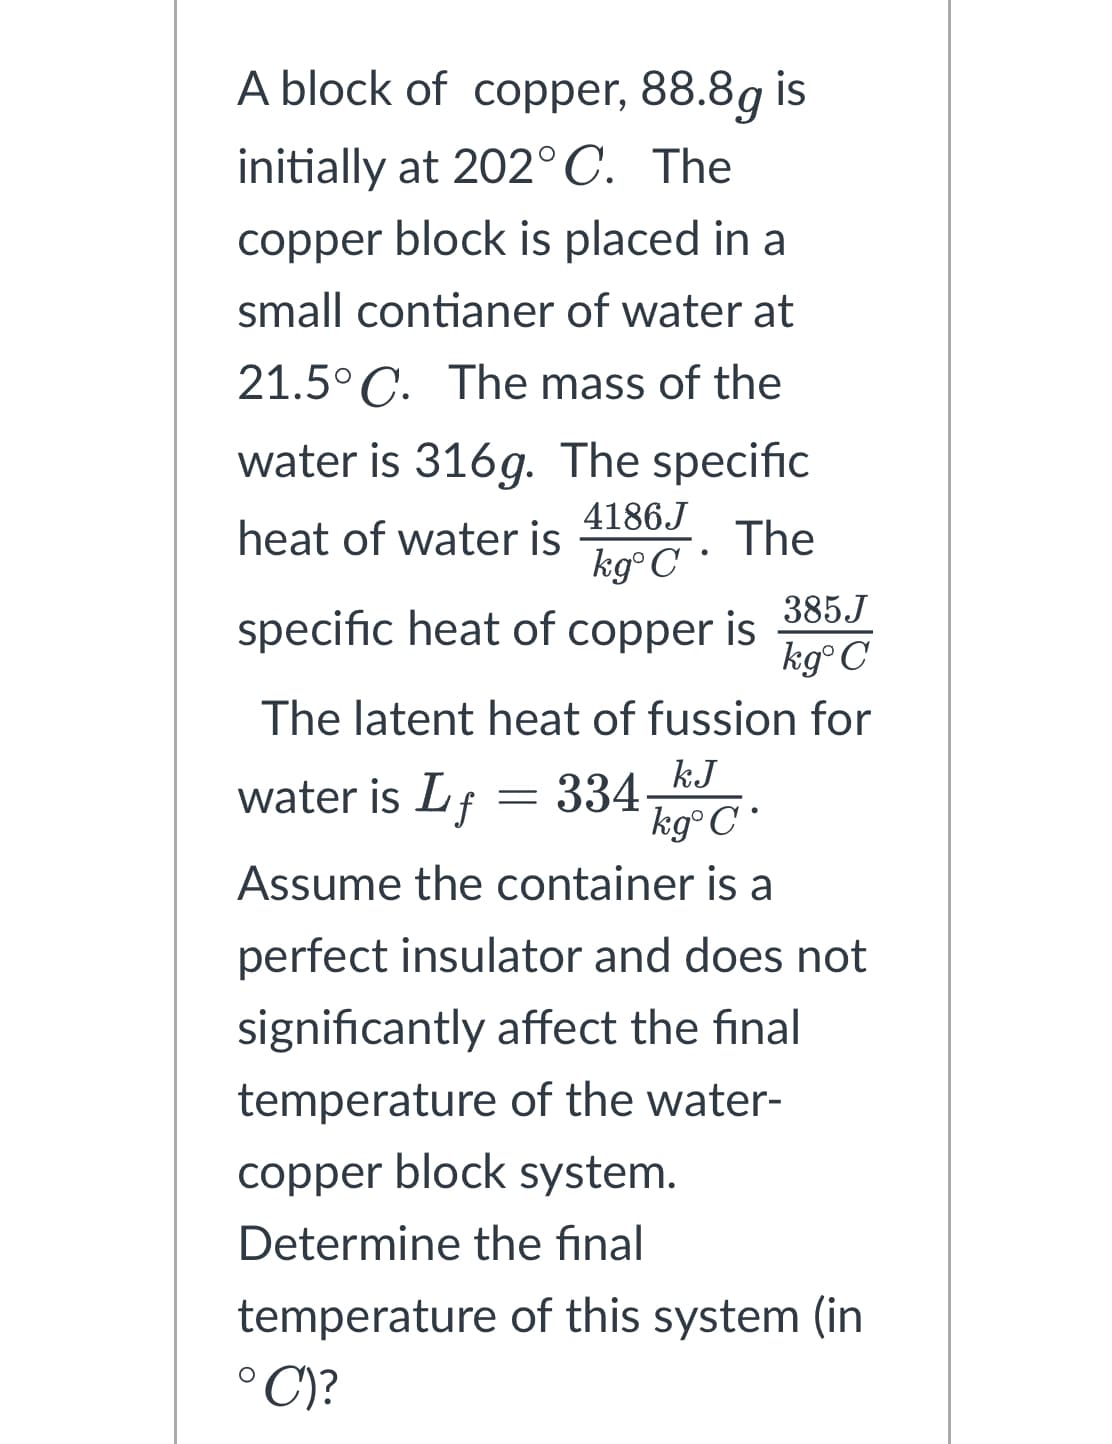 A block of copper, 88.8g is
initially at 202°C. The
copper block is placed in a
small contianer of water at
21.5°C. The mass of the
water is 316g. The specific
4186J
heat of water is
The
kg°C •
specific heat of copper is
385.J
kg°C
The latent heat of fussion for
water is Lf
334
kJ
kgᵒ C
Assume the container is a
perfect insulator and does not
significantly affect the final
temperature of the water-
copper block system.
Determine the final
temperature of this system (in
°C)?
=